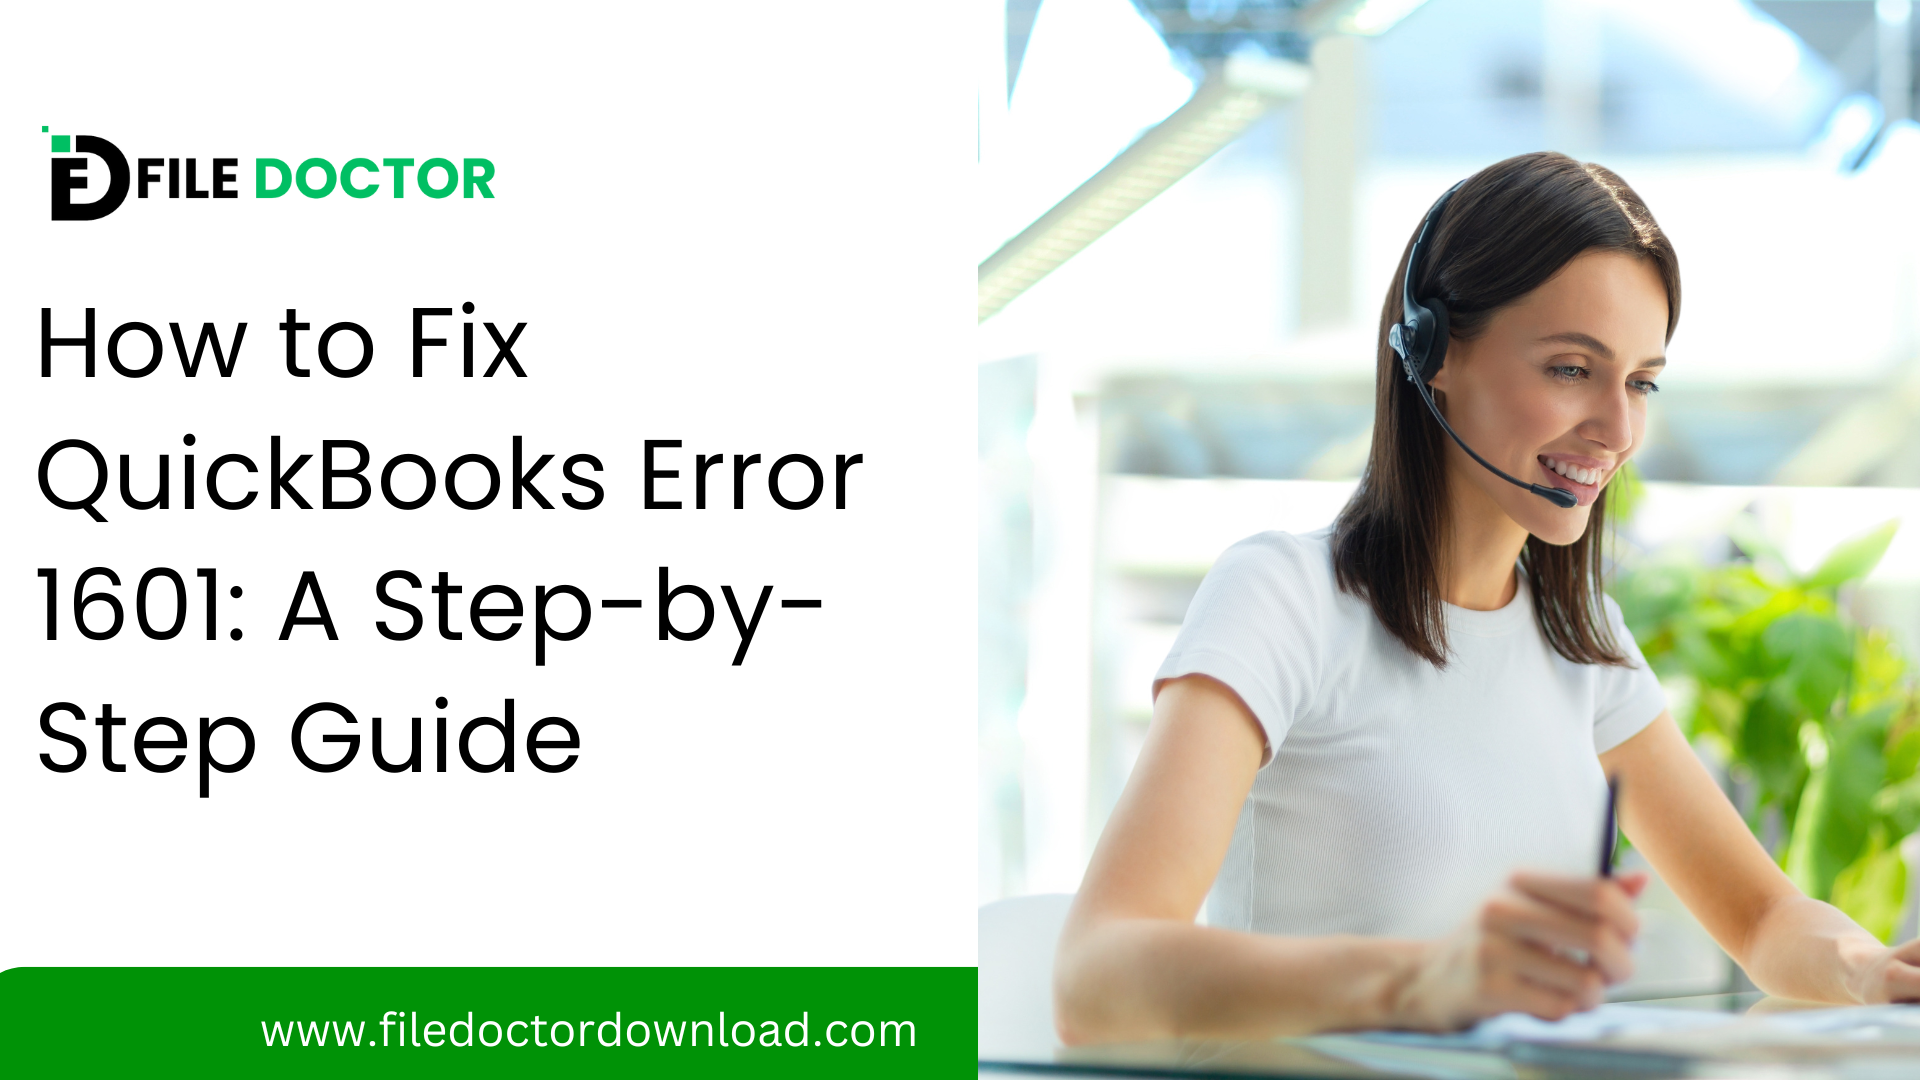 How to Fix QuickBooks Error 1601: A Step-by-Step Guide